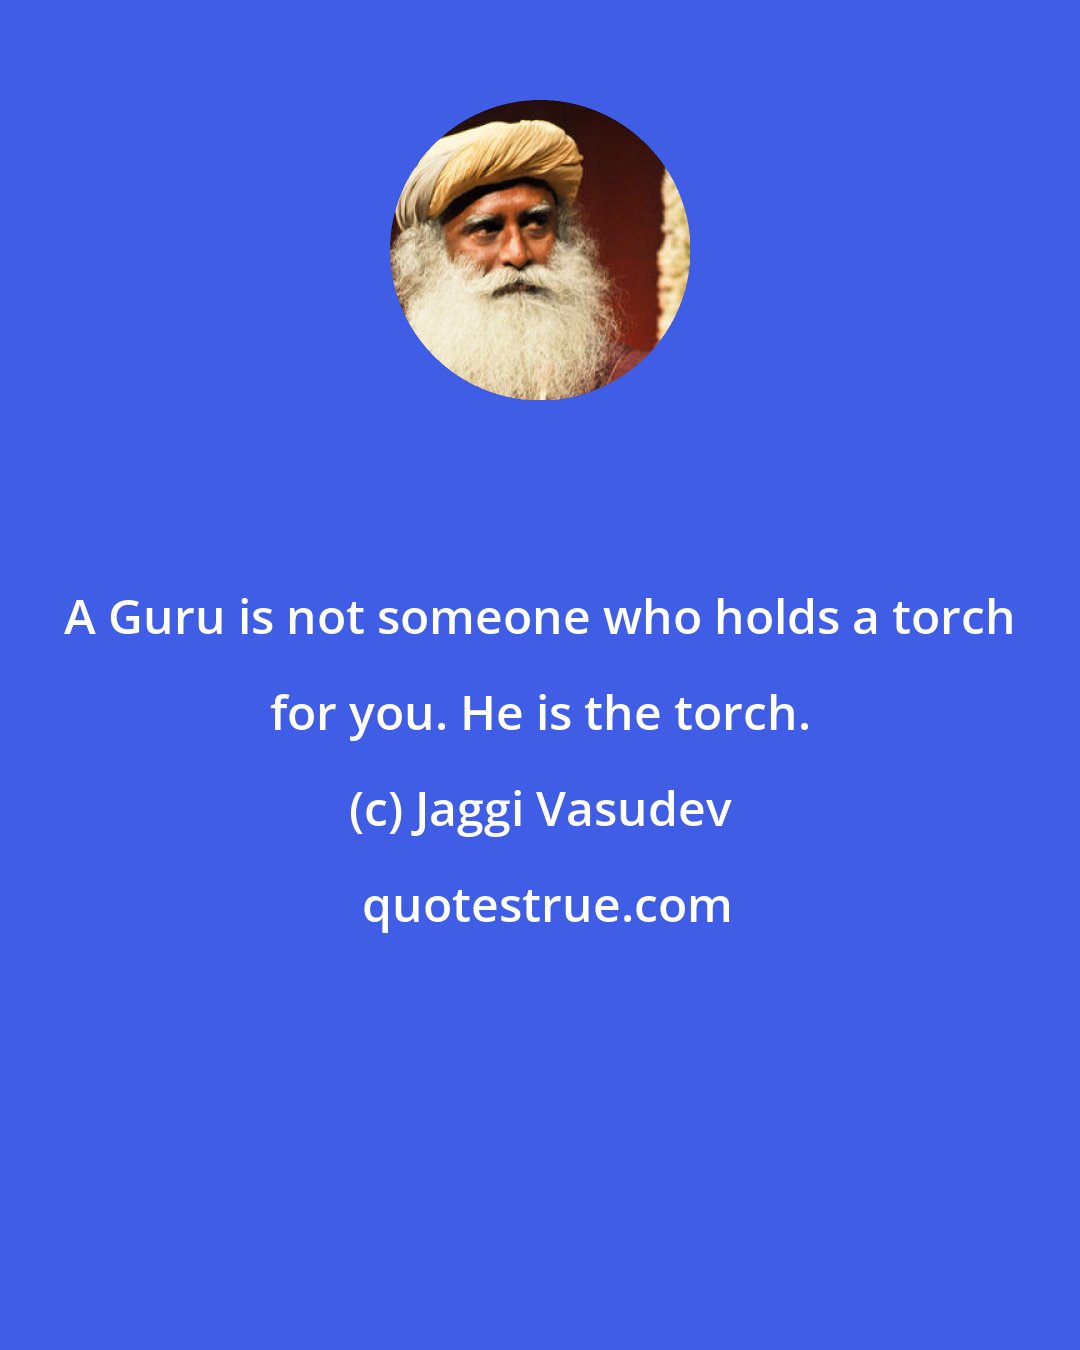 Jaggi Vasudev: A Guru is not someone who holds a torch for you. He is the torch.